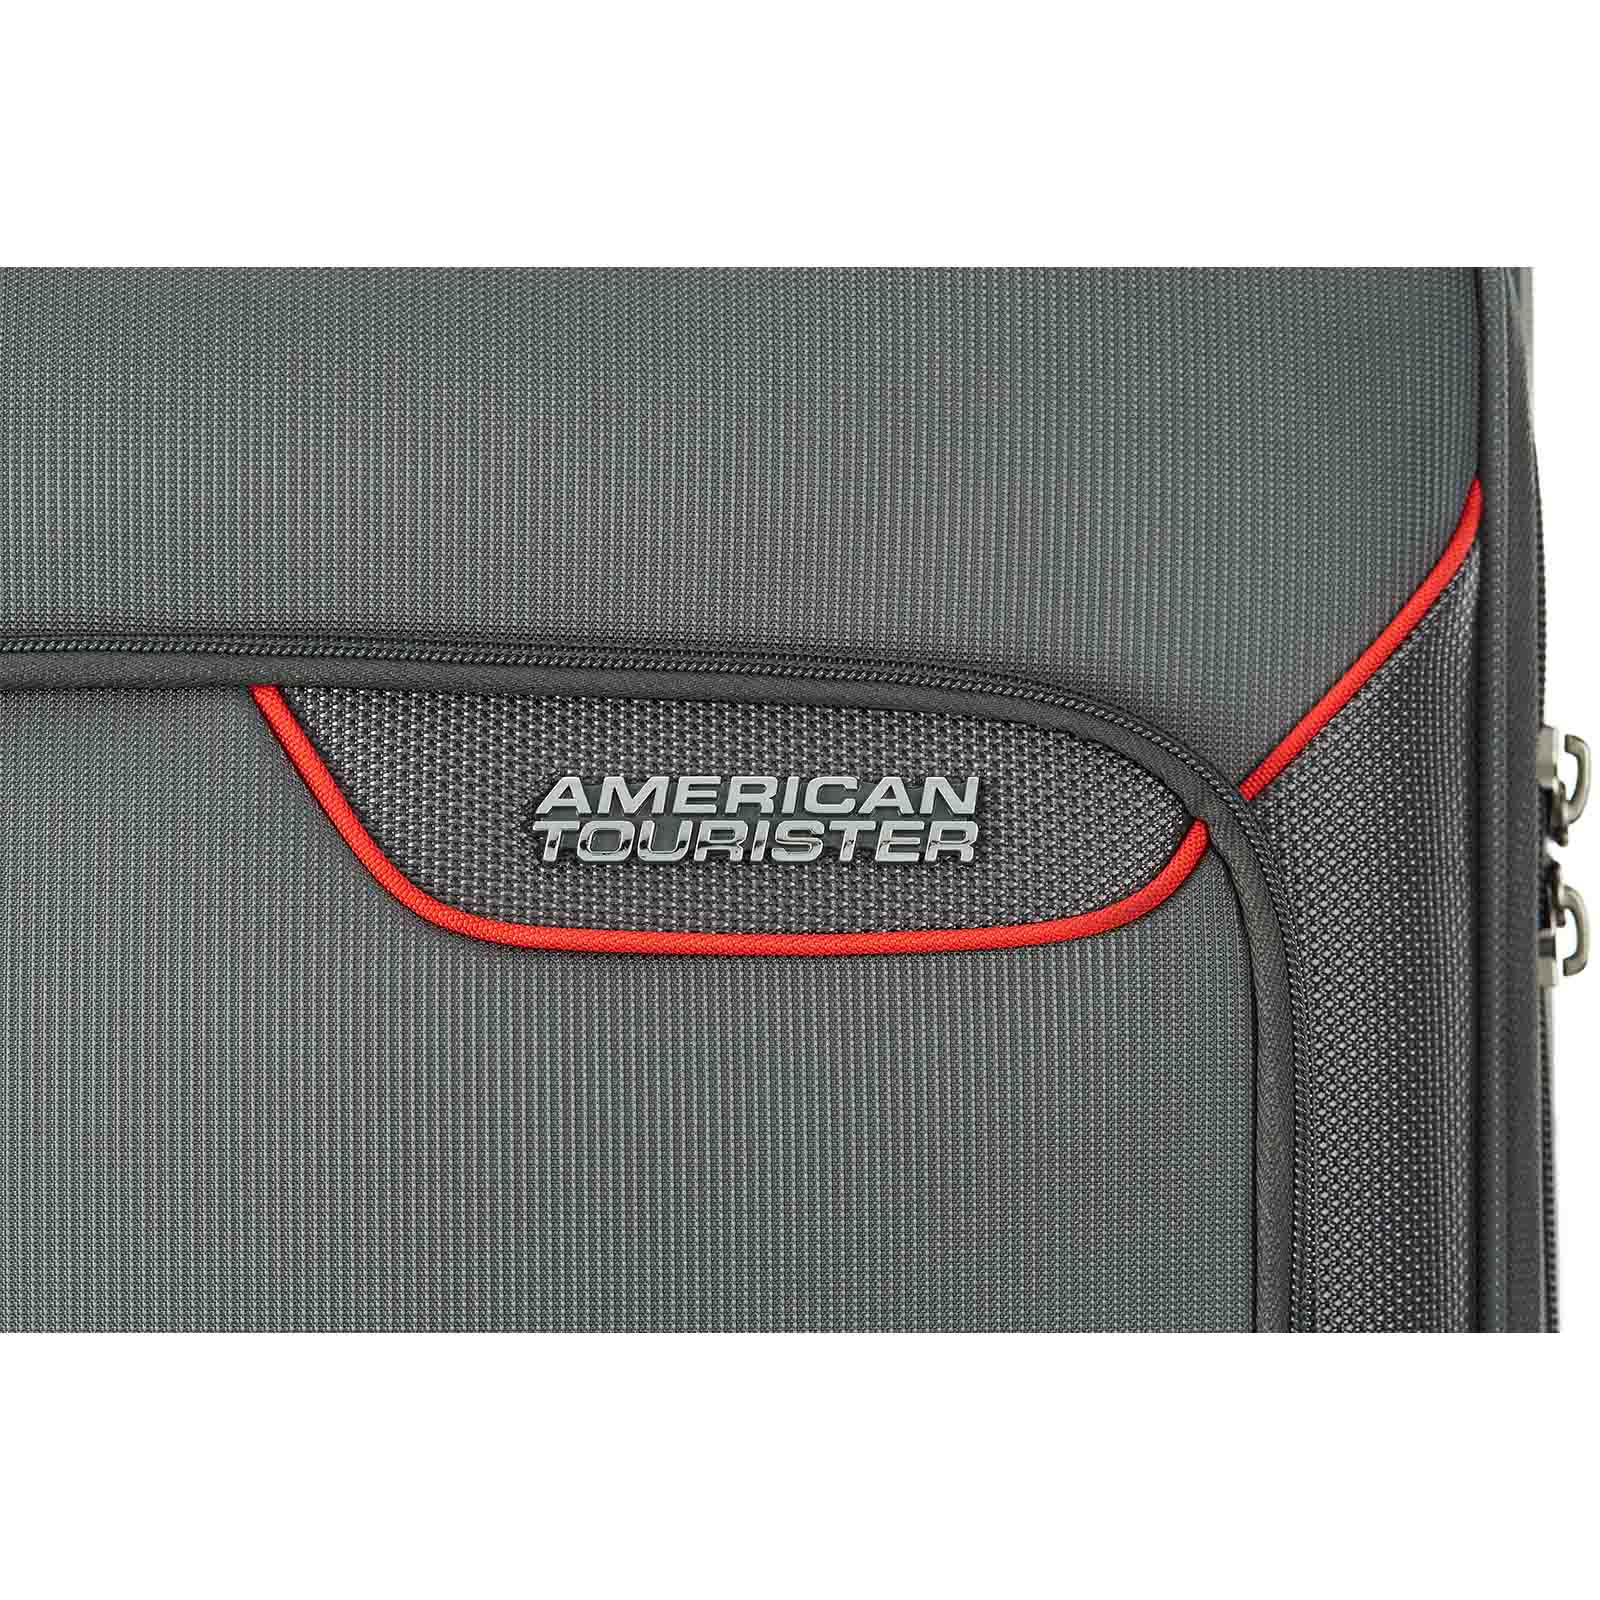 American-Tourister-Applite-4-Eco-82cm-Suitcase-Grey-Red-Logo